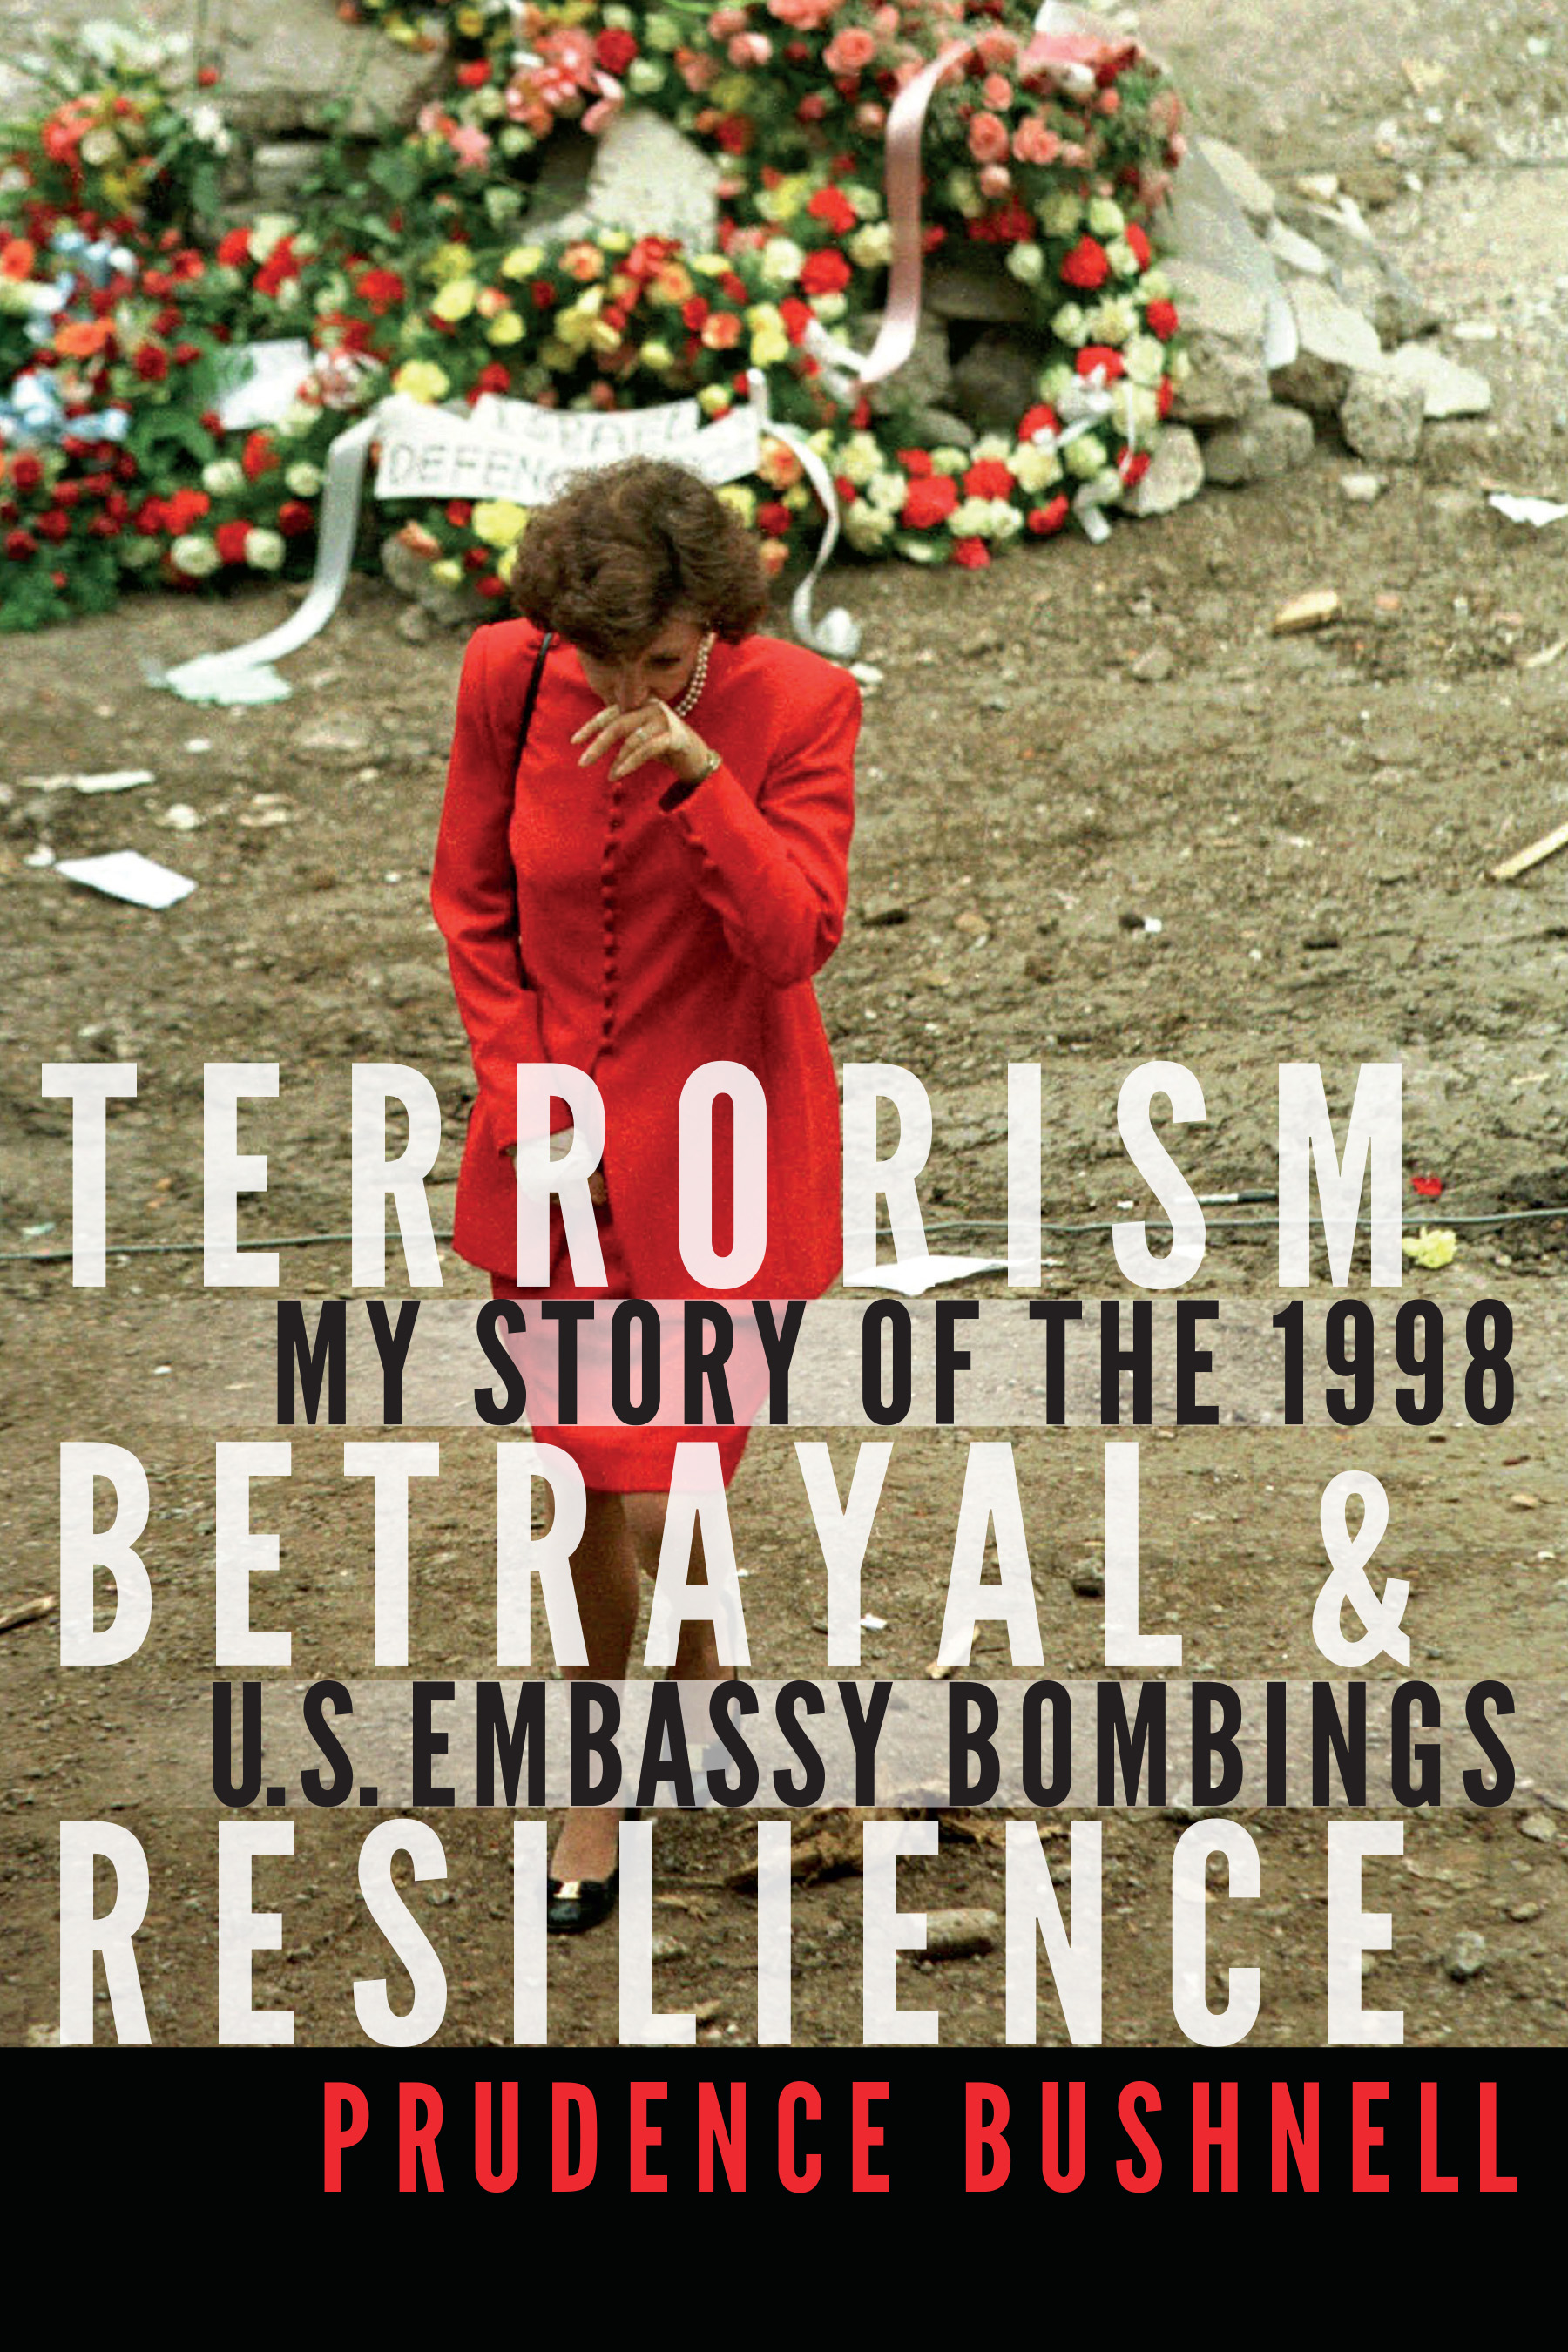 Terrorism, Betrayal, and Resilience